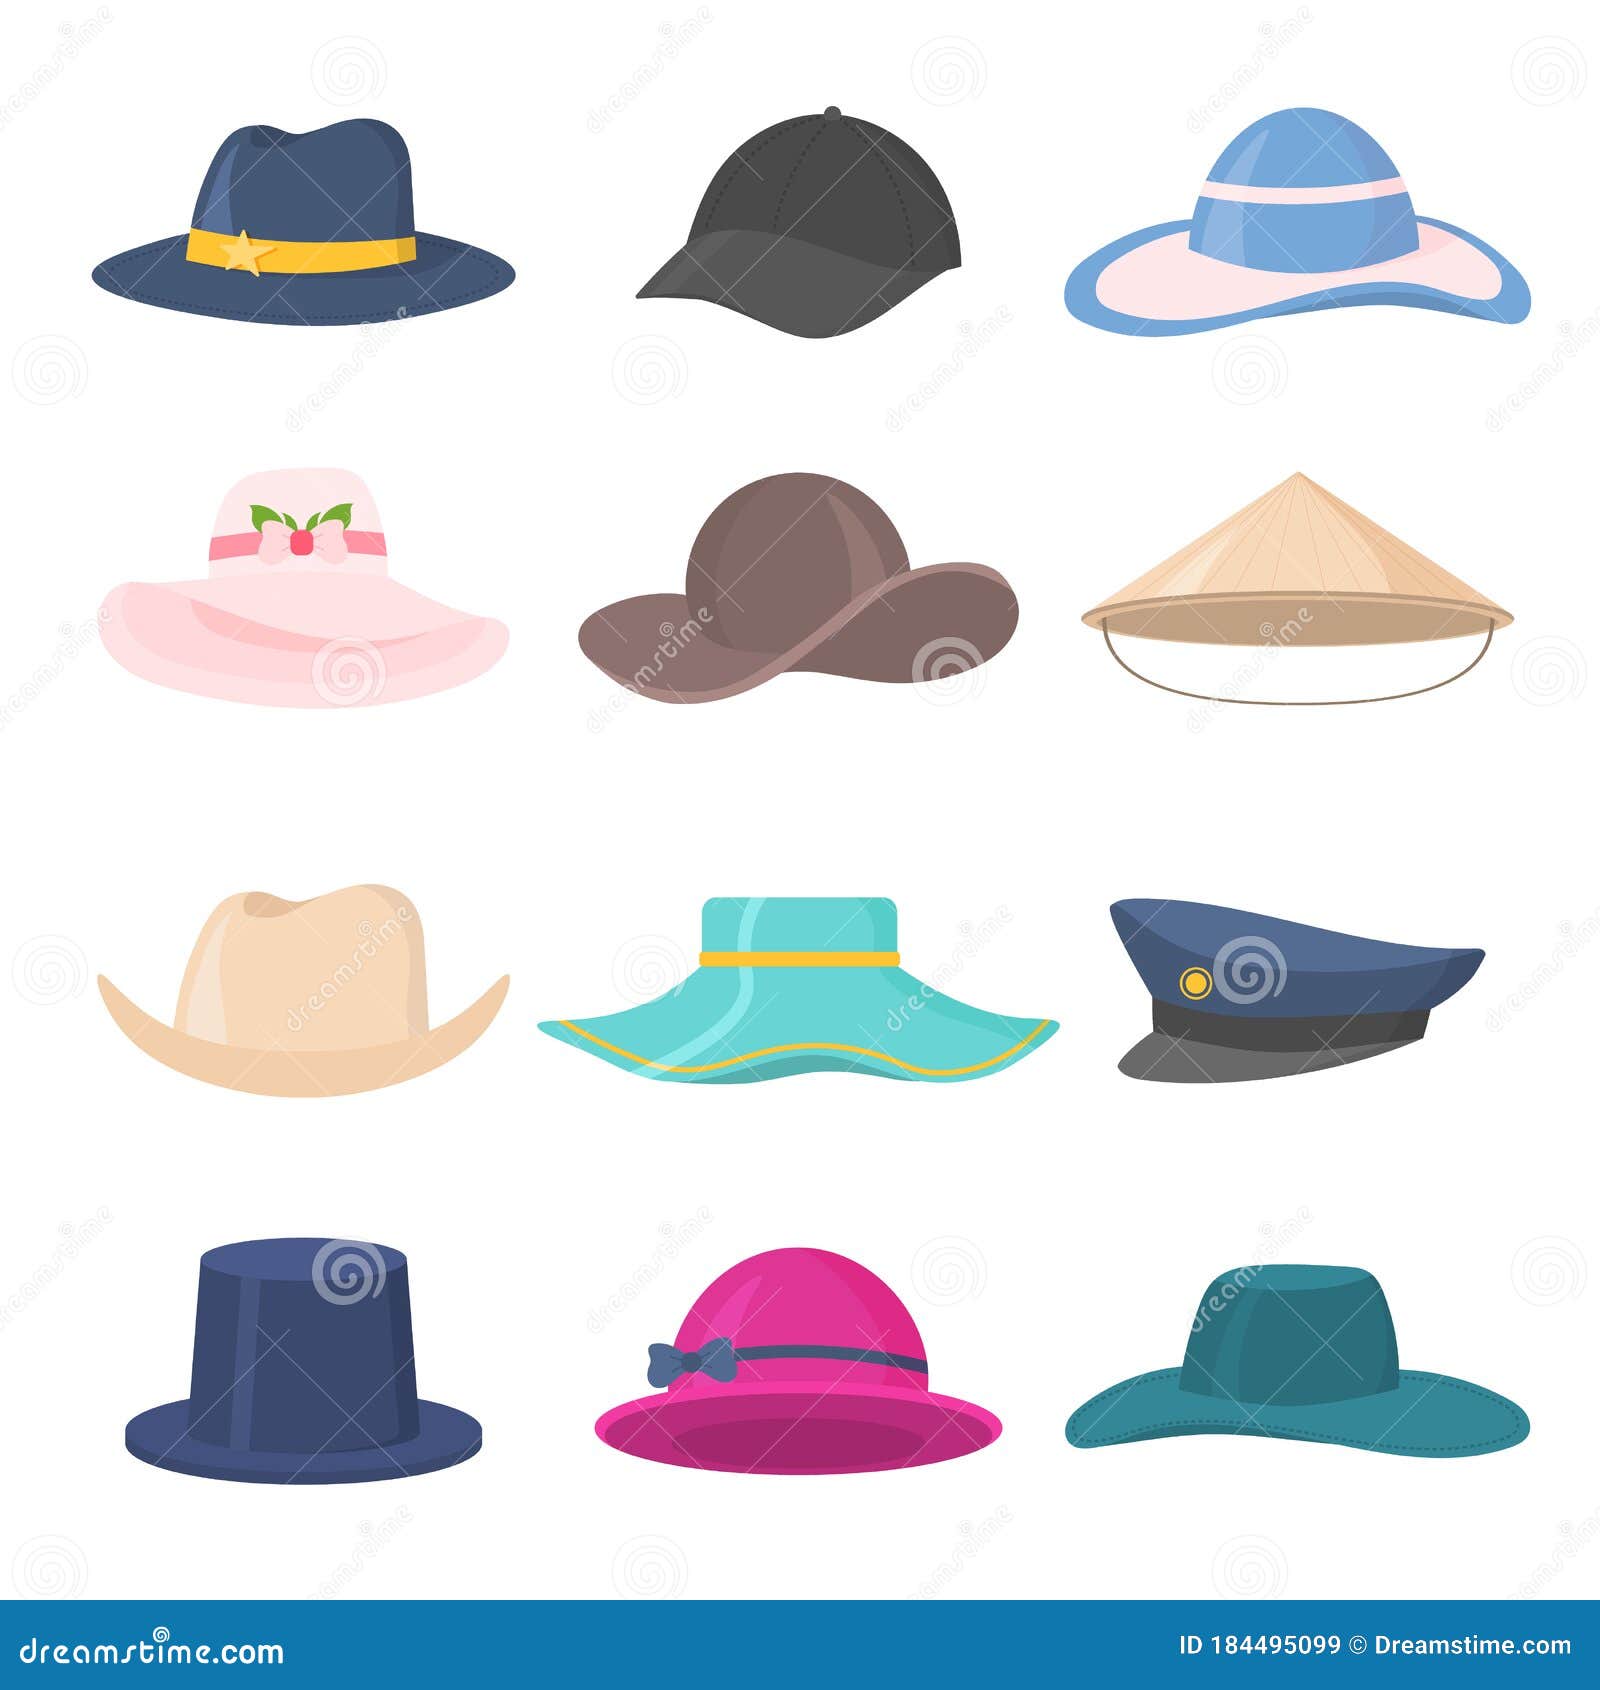 Clancy overse tale Headwear, hats, caps. stock vector. Illustration of beret - 184495099